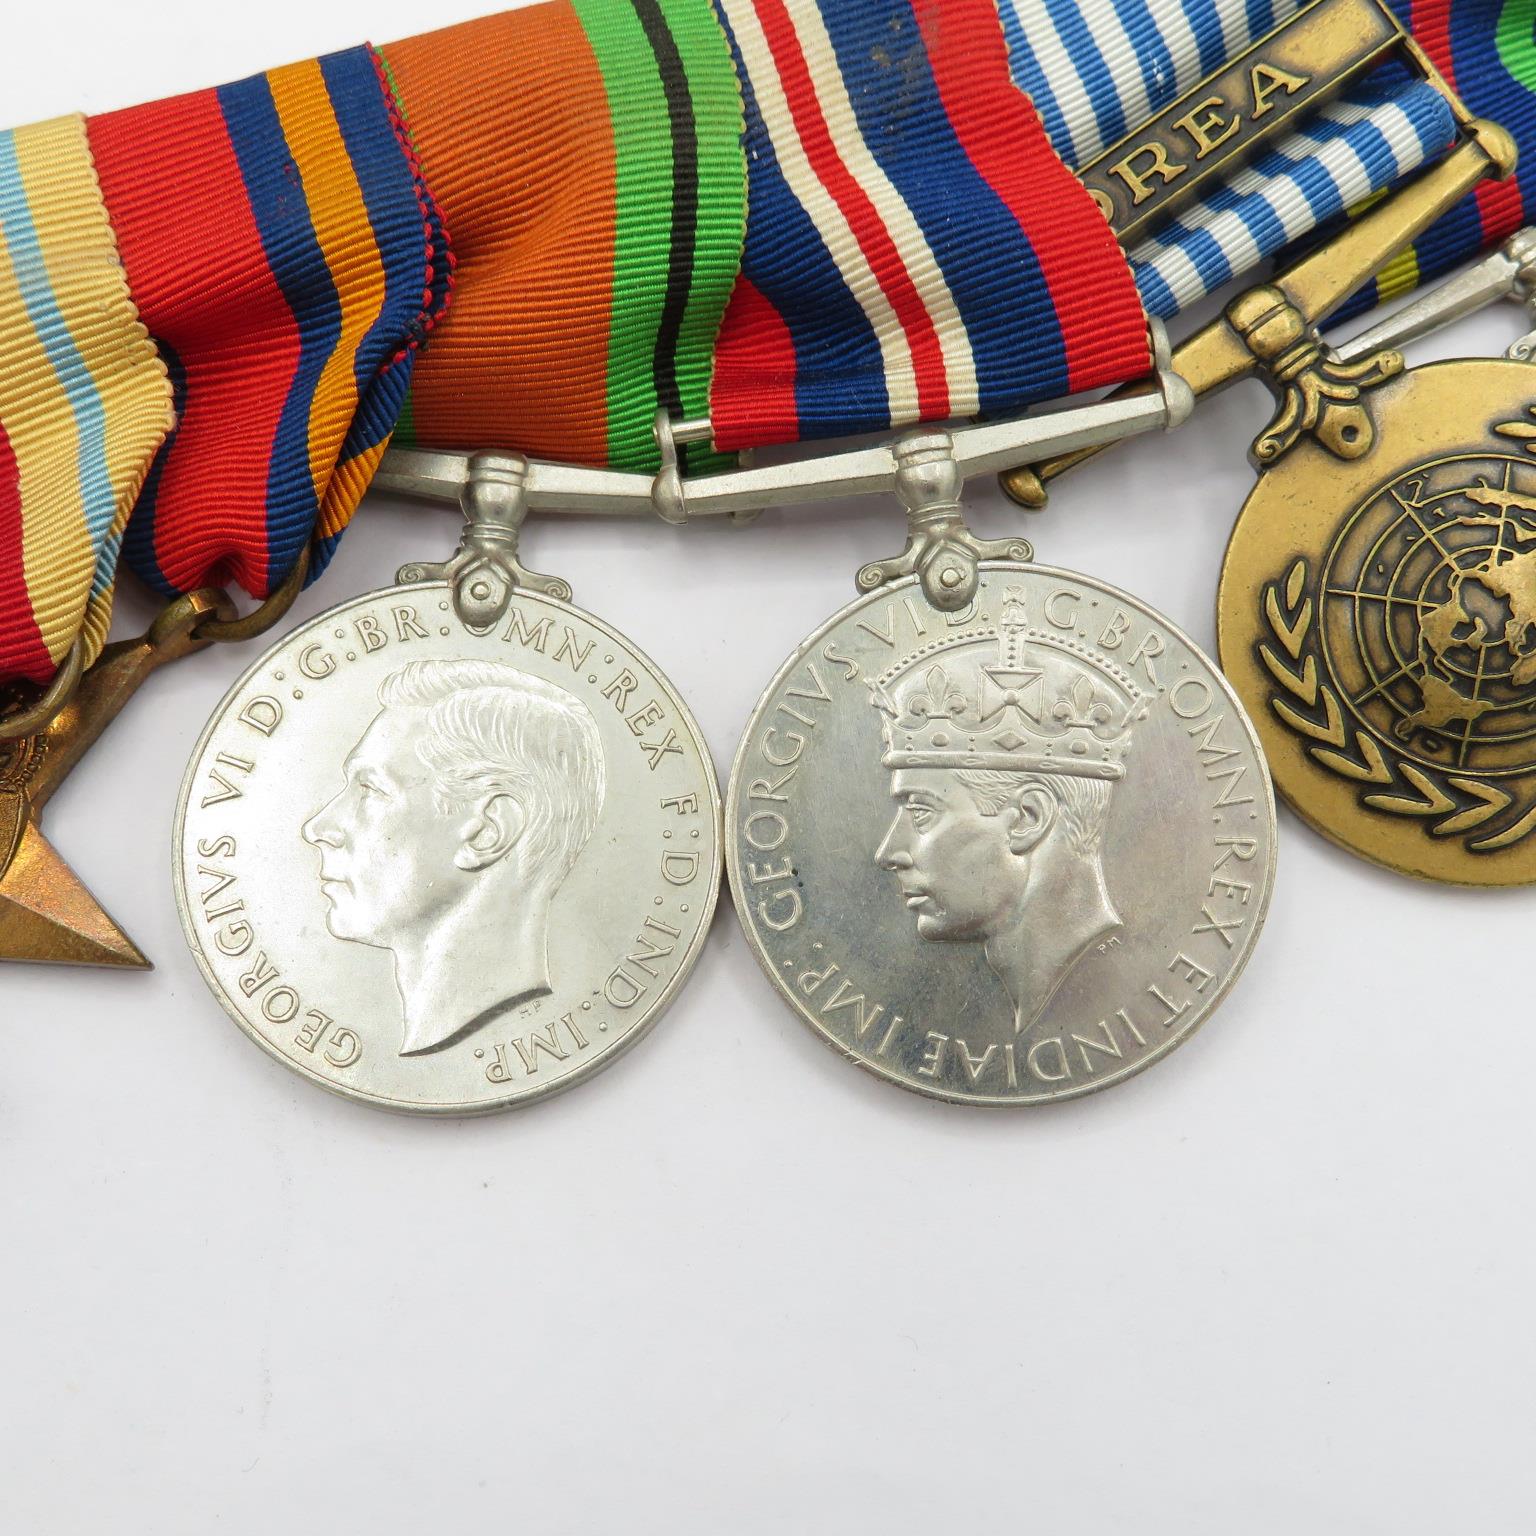 Selection of 7 medals all on one bar including Korea medal. - Image 4 of 7